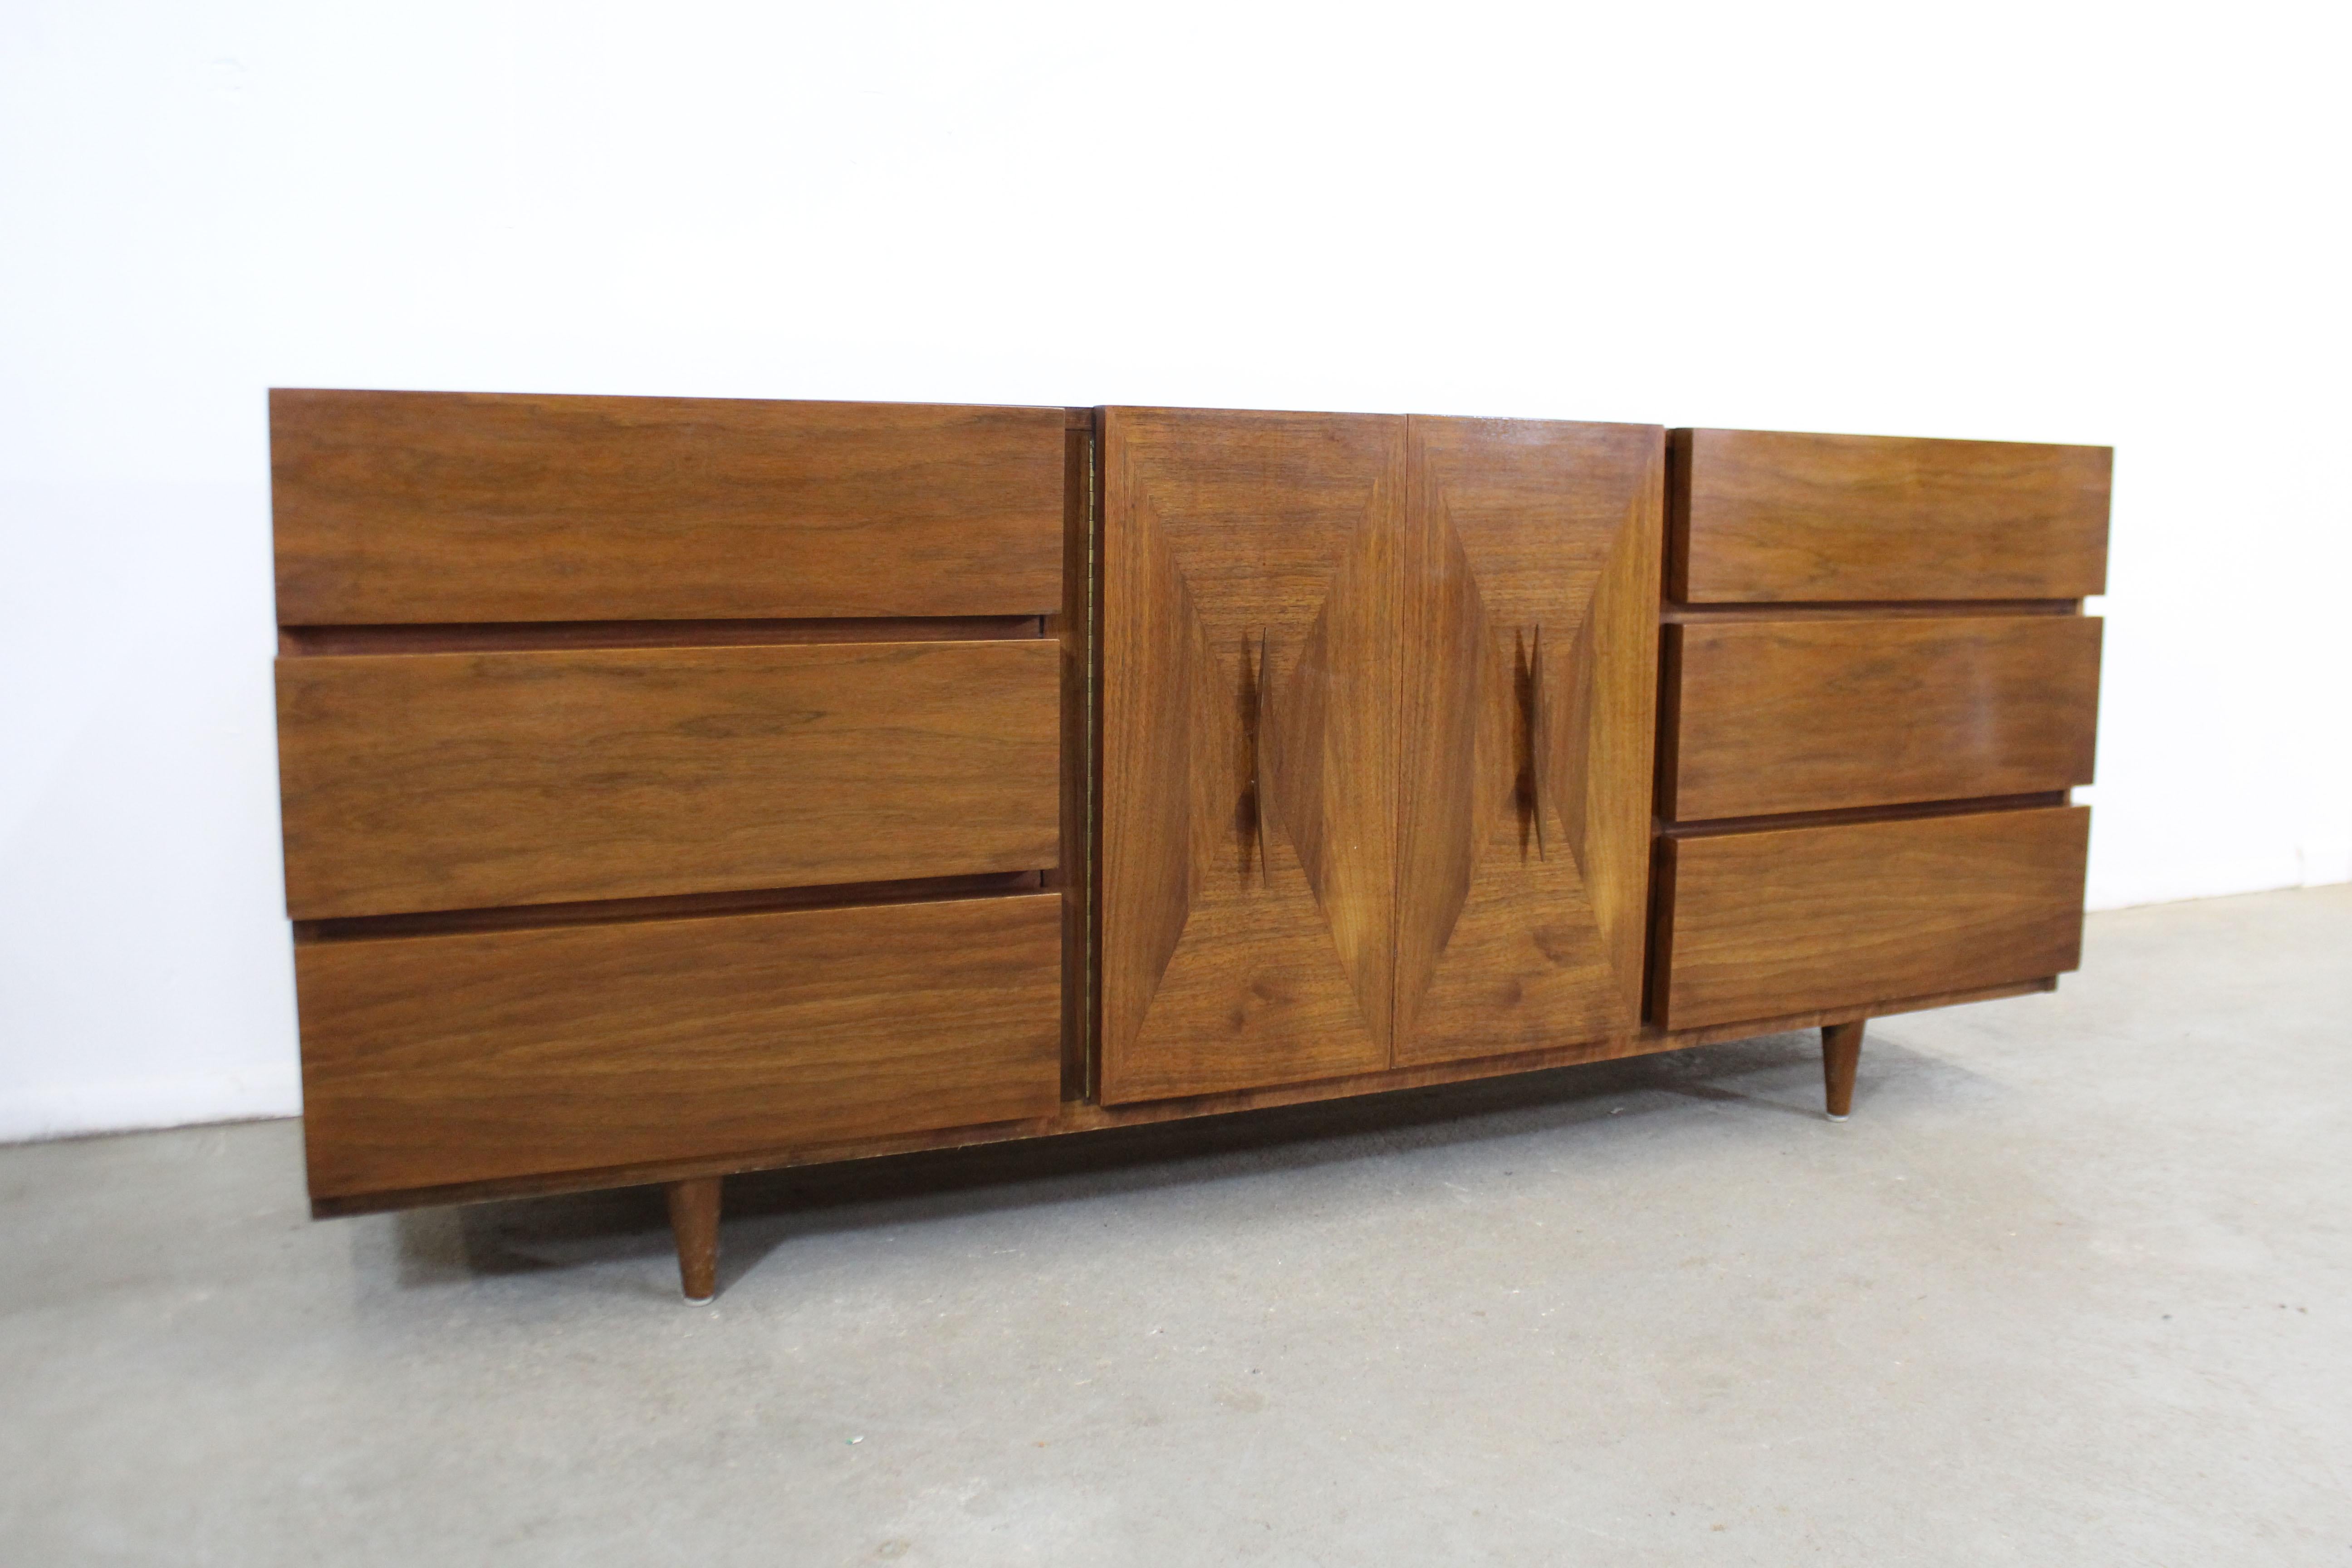 Offered is a Mid-Century Modern credenza made of walnut by American of Martinsville. Features beautifully parqueted doors with sculpted handles. Includes nine dovetailed drawers, three behind the doors. It is in good condition with some surface